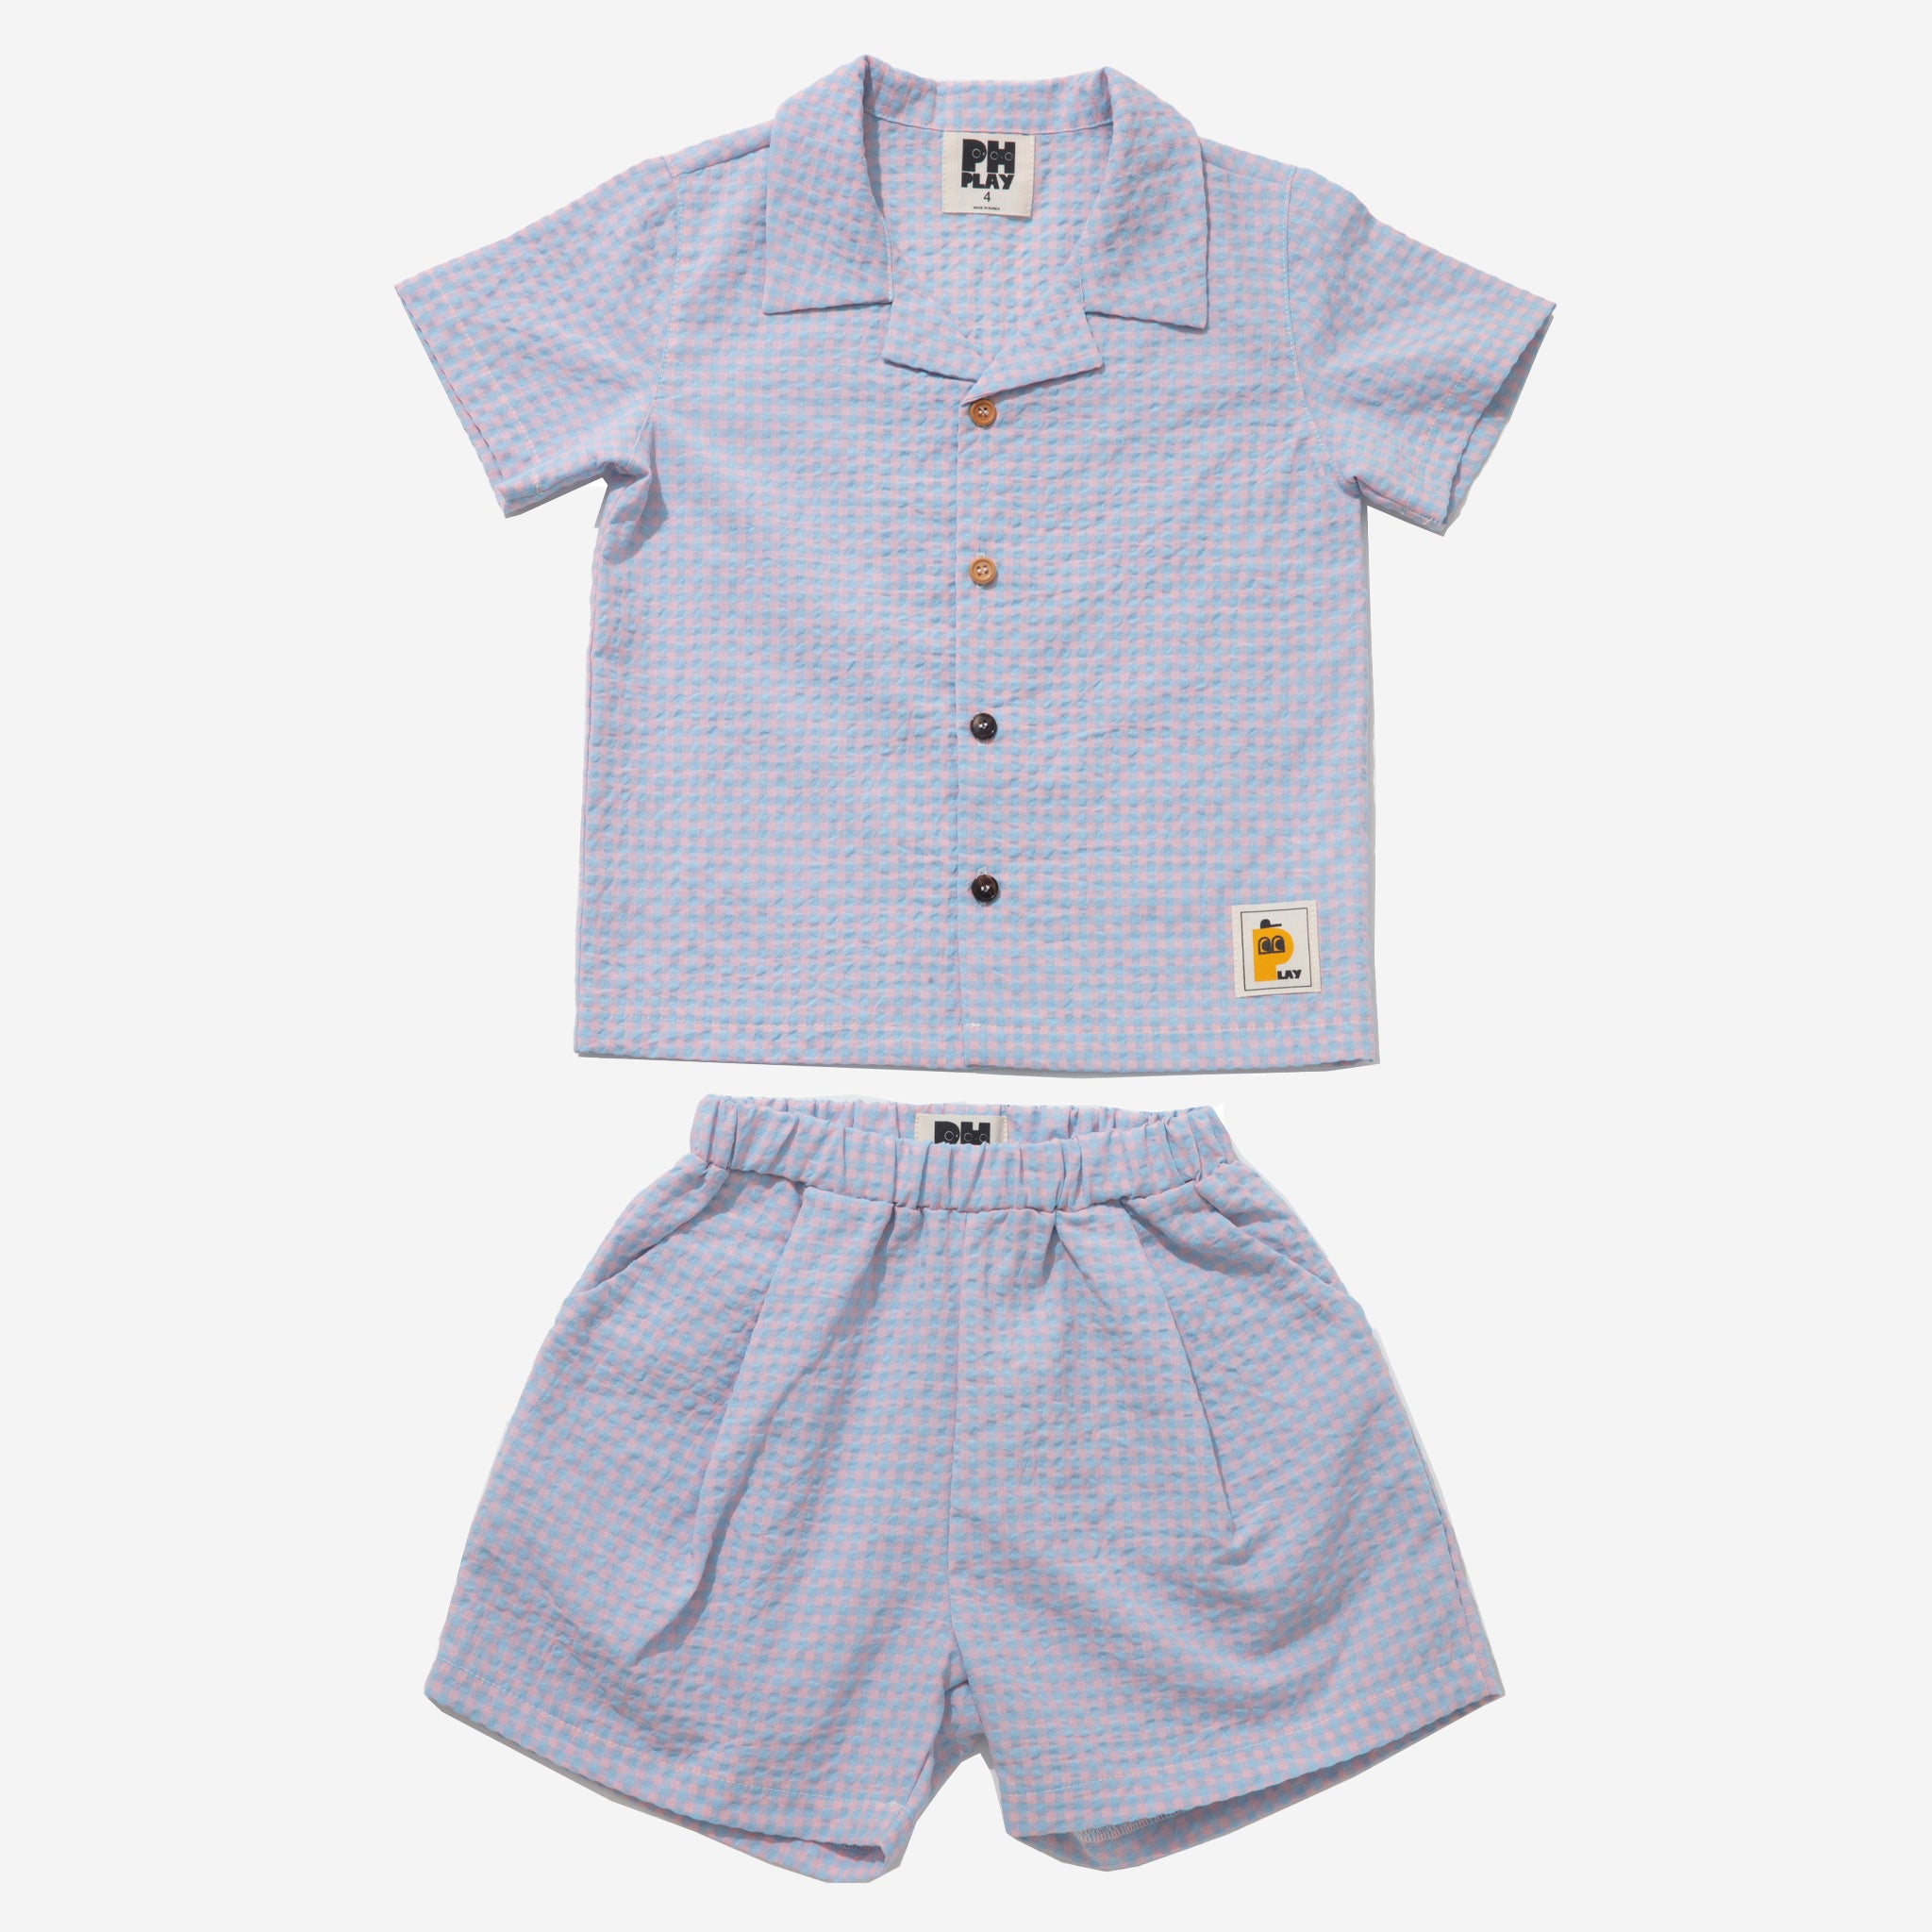 light blue checker set includes short sleeves top with buttons on the front and a short 